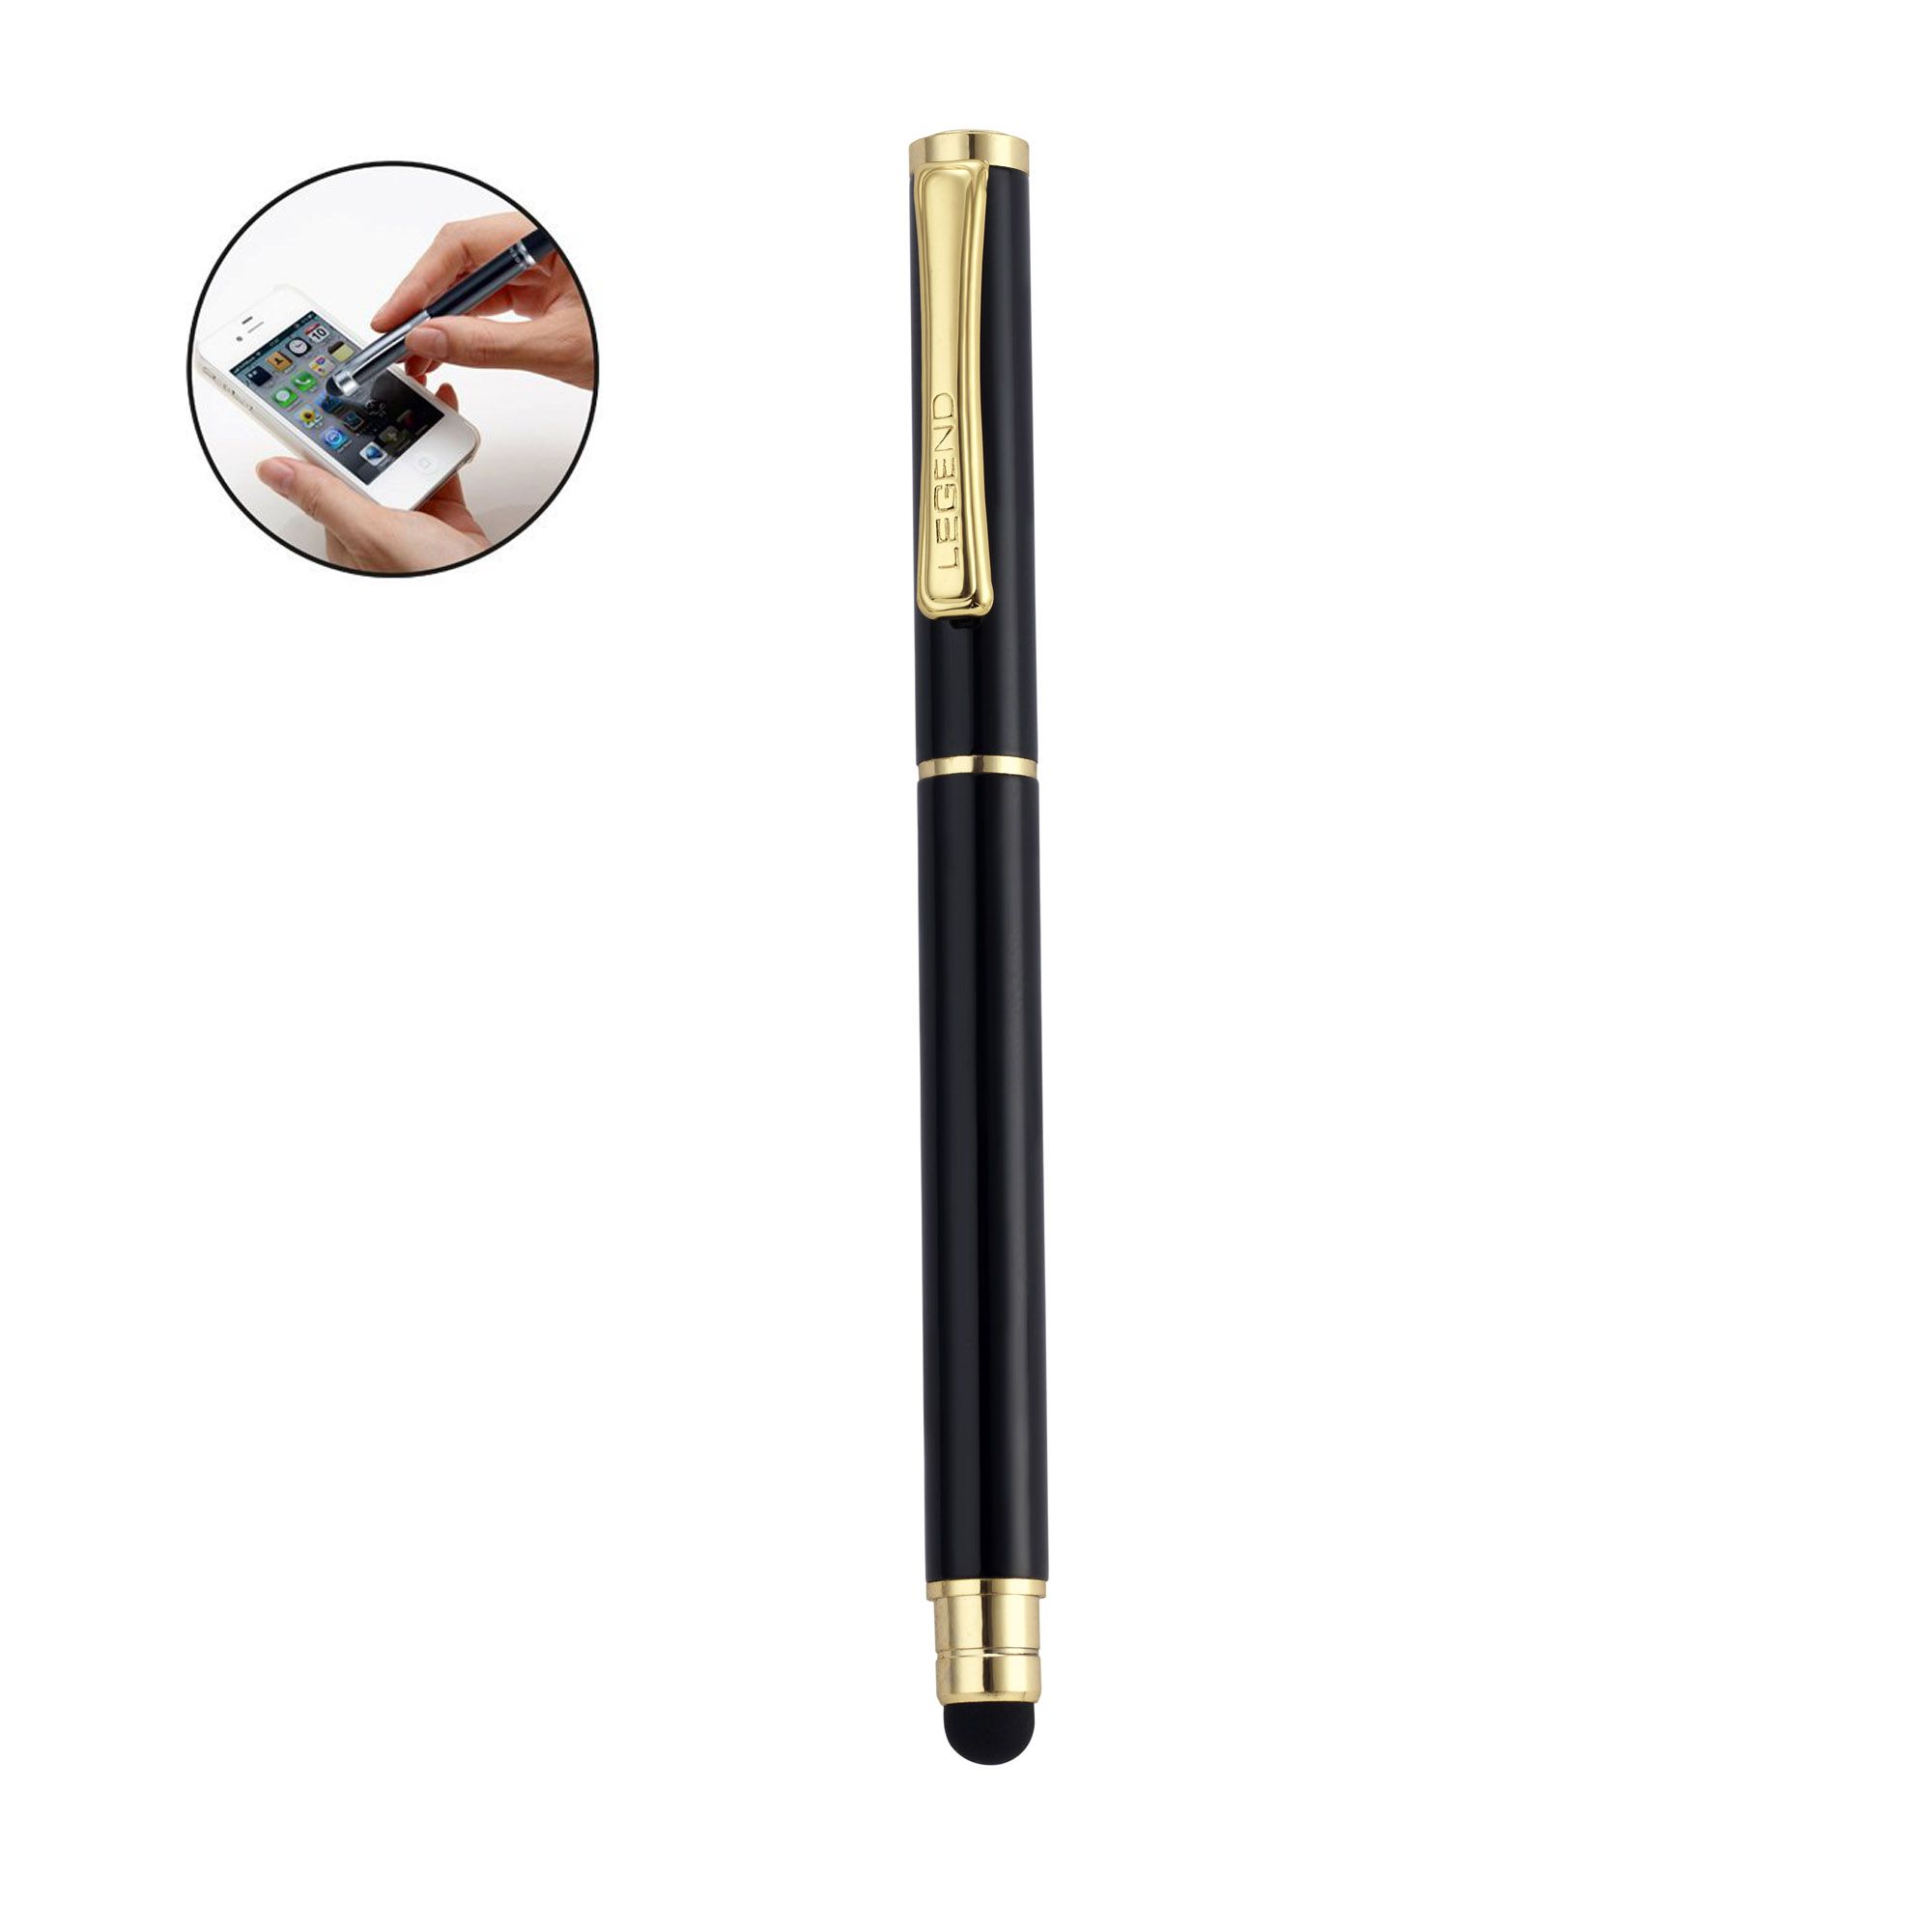     			LEGEND Divine Ball Pen 2 in 1 Capacitive Stylus Pen with Luxury Look (Black) Handcrafted Pen